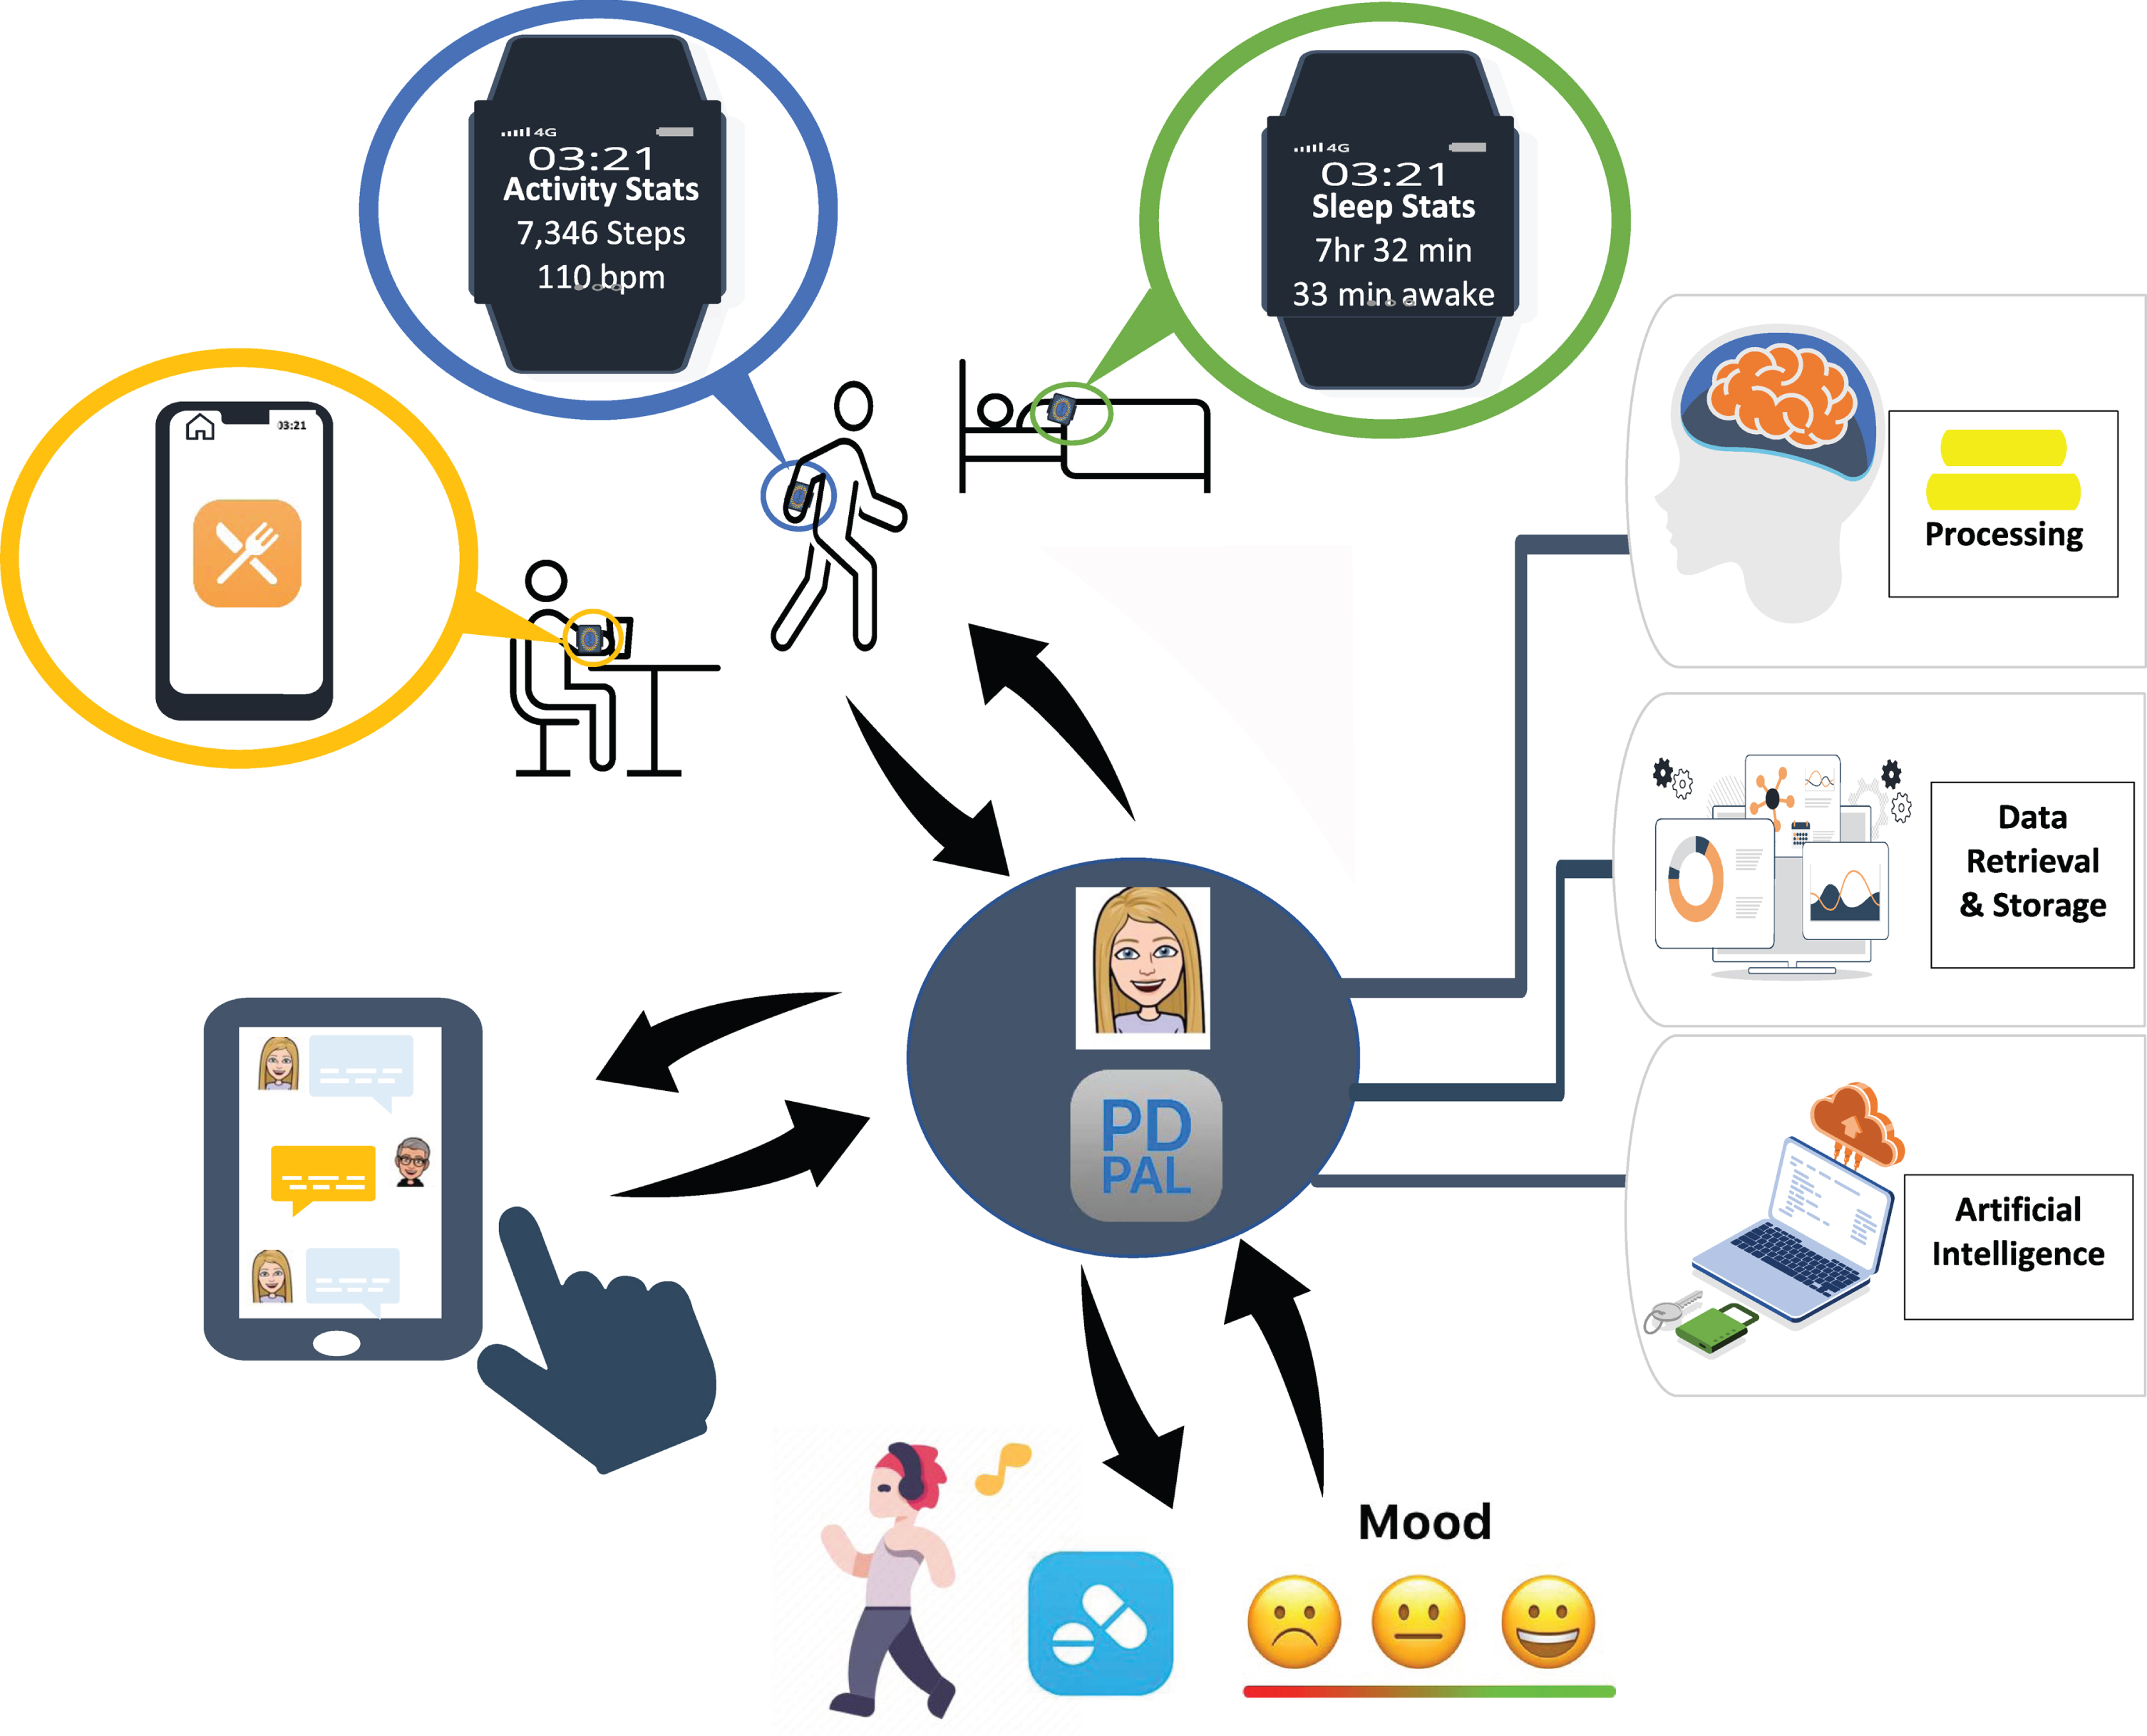 Proposed Digital Therapeutic Platform Provides Centralized Hub for PD Management: “PD PAL” Artificially Intelligent Digital Therapeutic Platform provides a centralized hub (“one-stop shop”) for PD management by integrating data from physical activity, sleep, eating habits, motor (e.g., gait) and non-motor (e.g., mood) symptoms in relationship to medication intake to provide personalized digital interventions that address the areas of most concern or to achieve pre-determined goals.